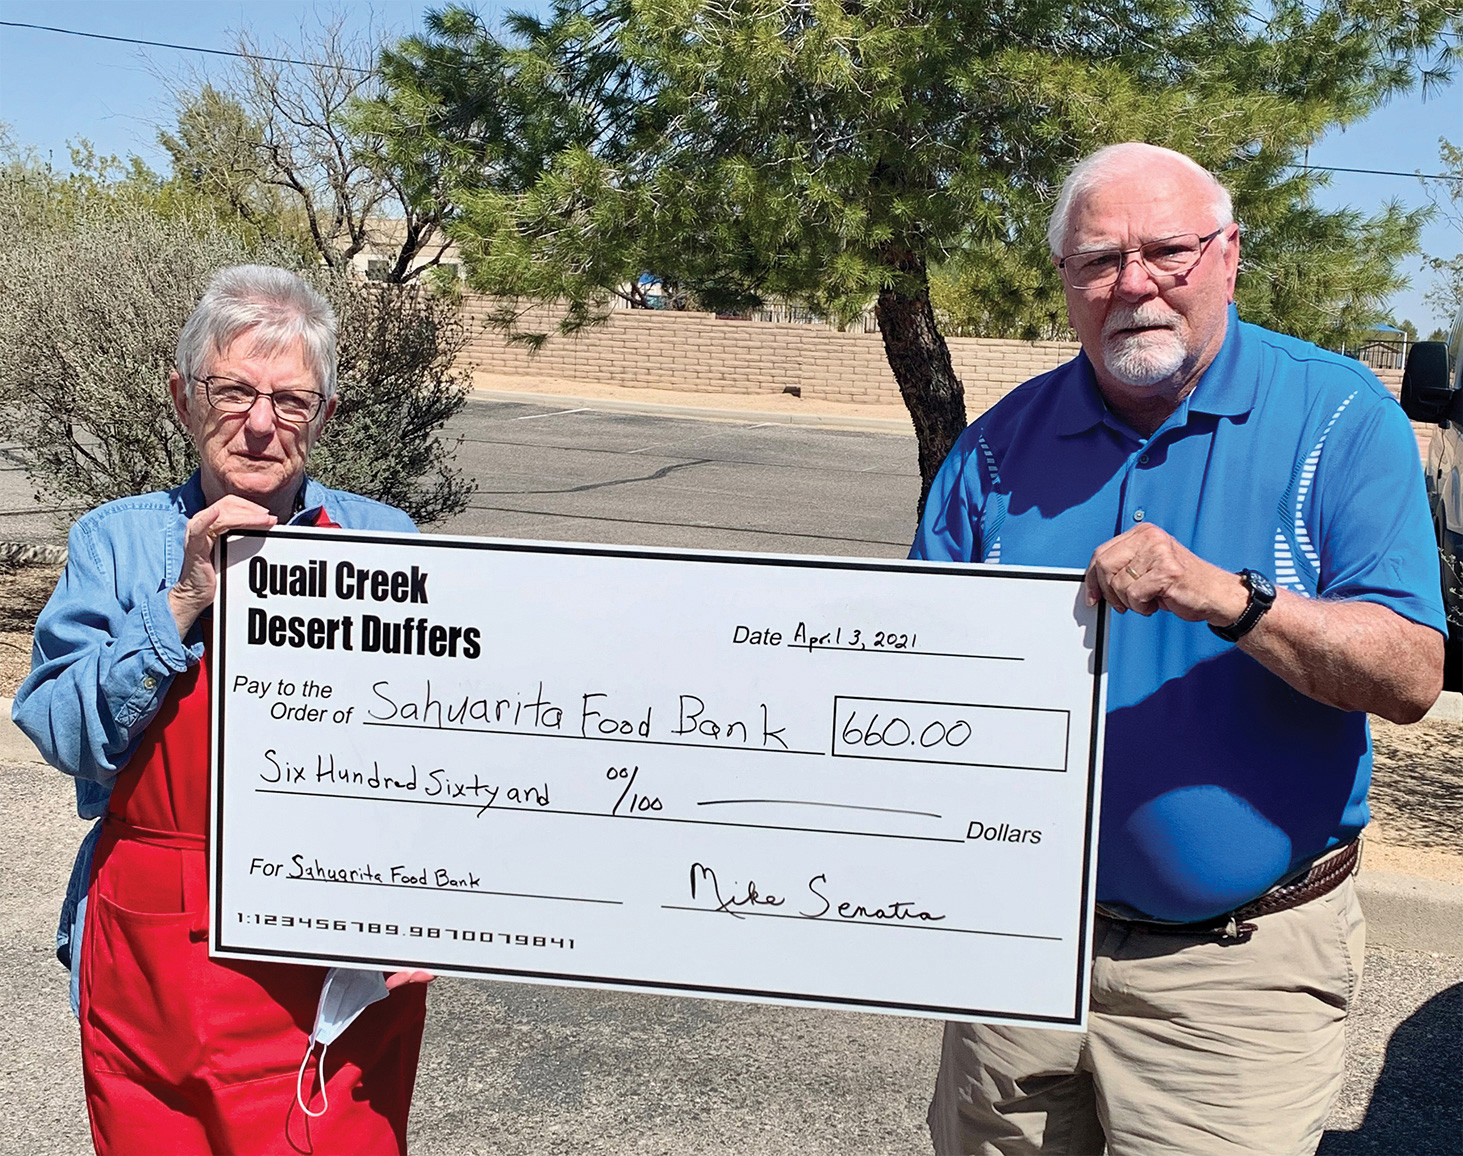 Desert Duffer President Mike Senatra presents a check for $660 to Sue Eaton, Assistant Director at the Sahuarita Food Bank